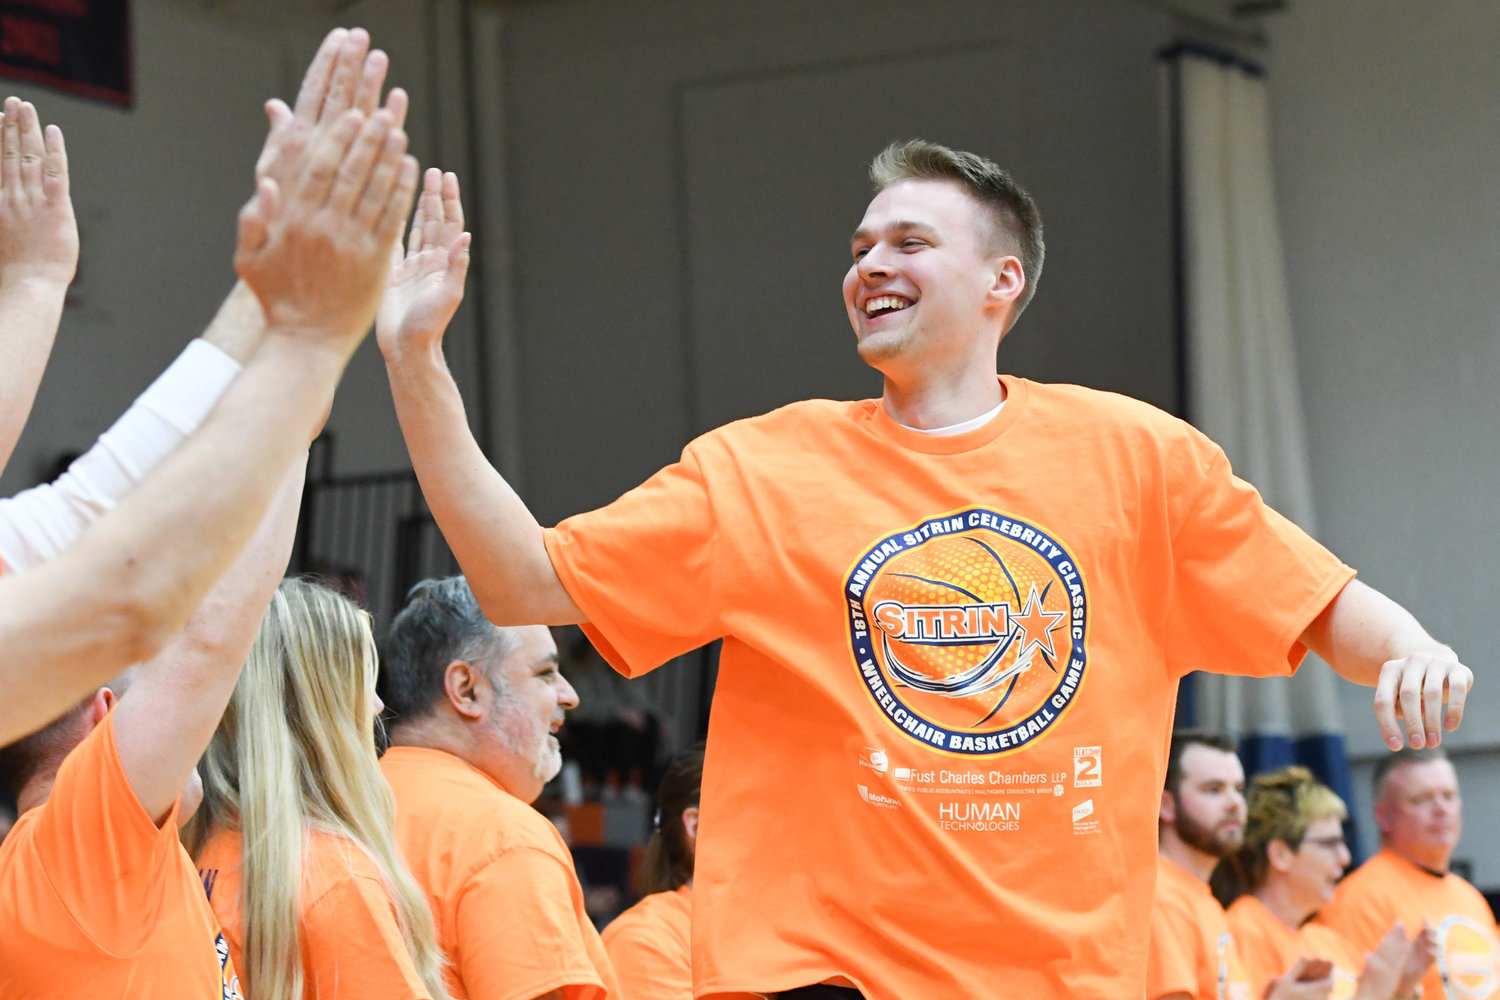 HIGH-FIVE — Syracuse Orange player Buddy Boeheim slaps hands with teammates during the start of 18th Annual Sitrin Celebrity Wheelchair Basketball Game on Thursday night at Utica University.